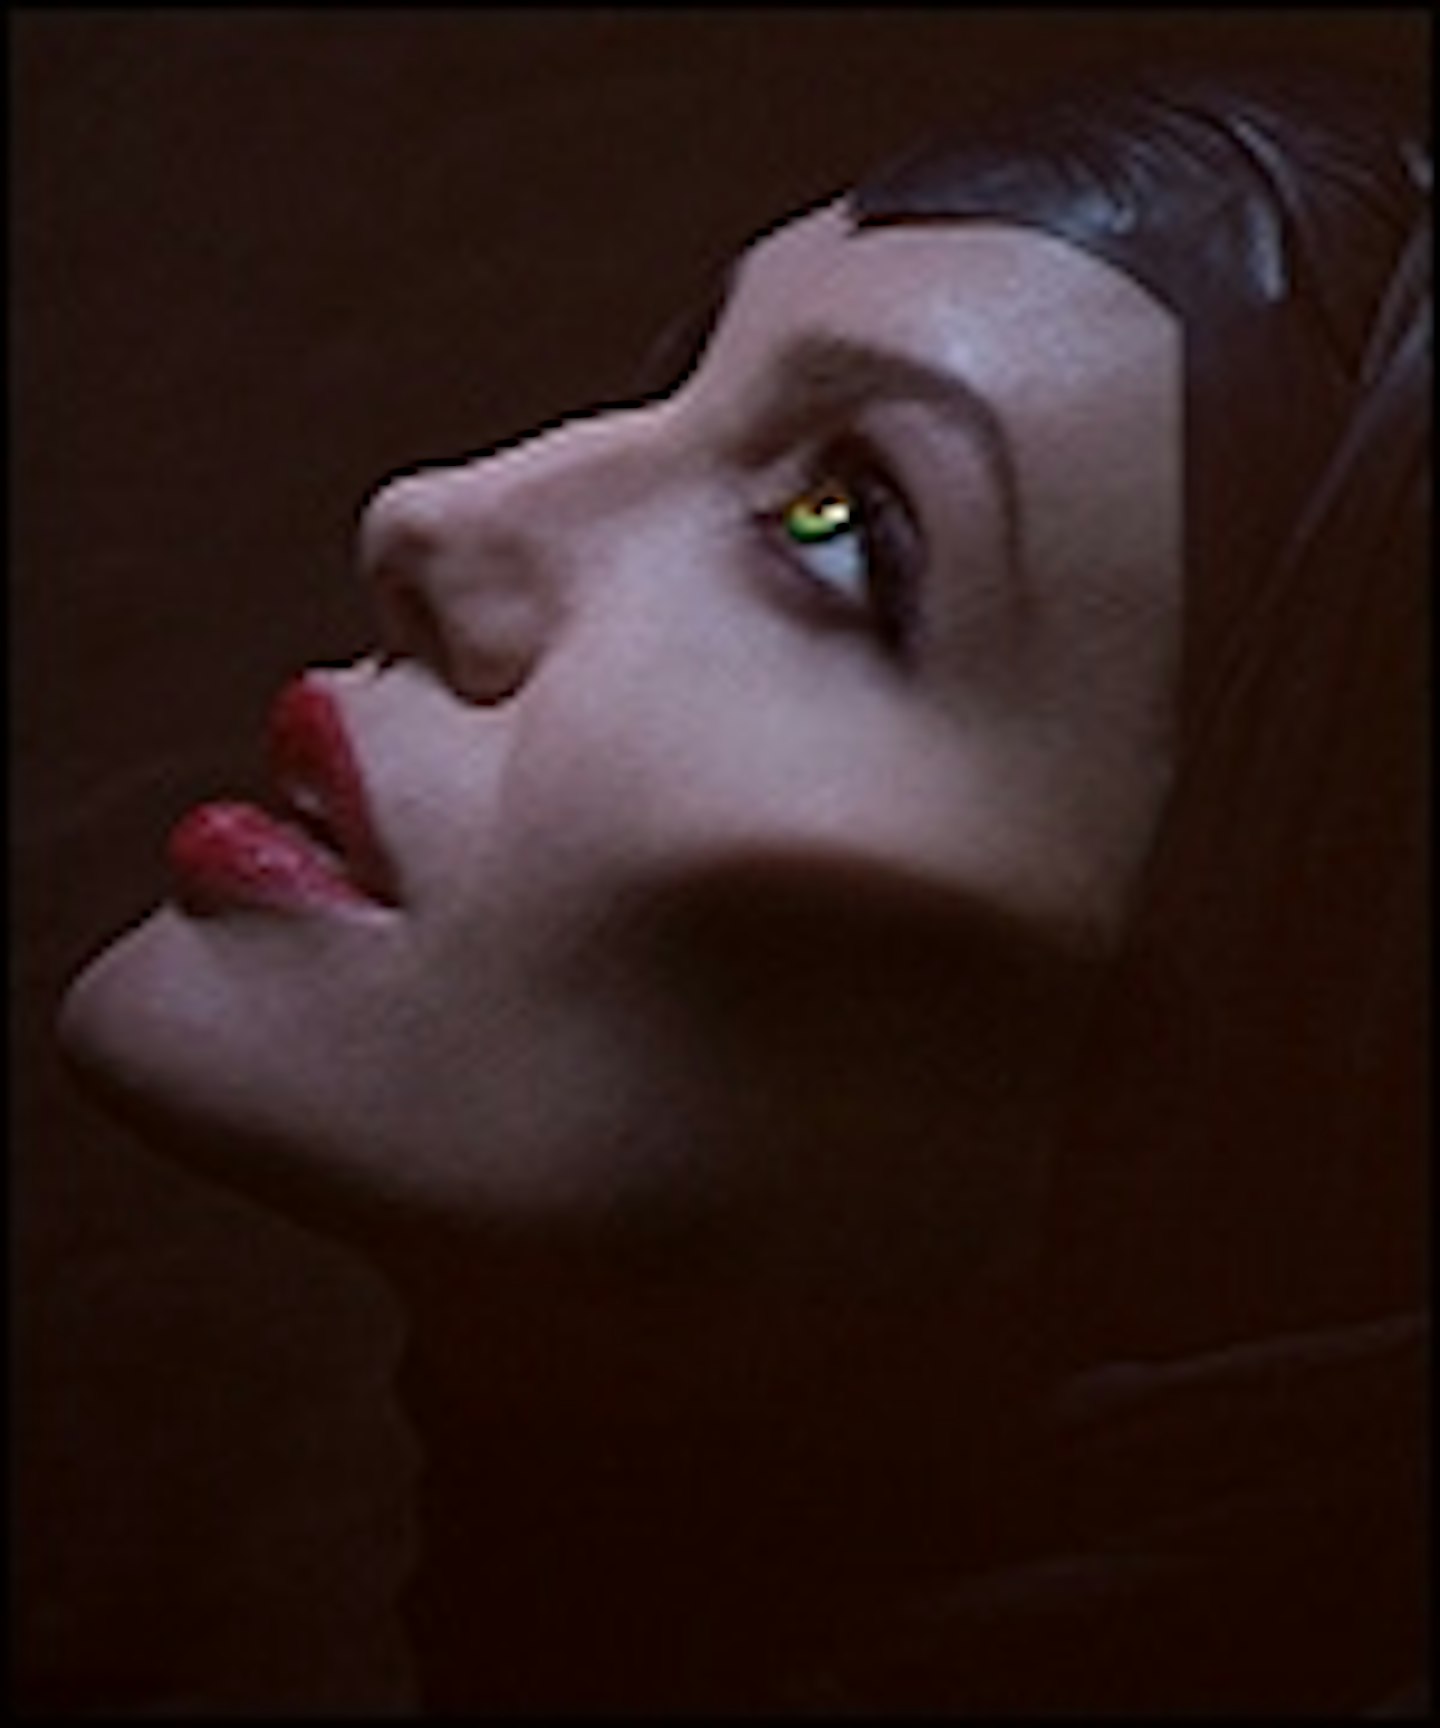 New Maleficent Poster Lands